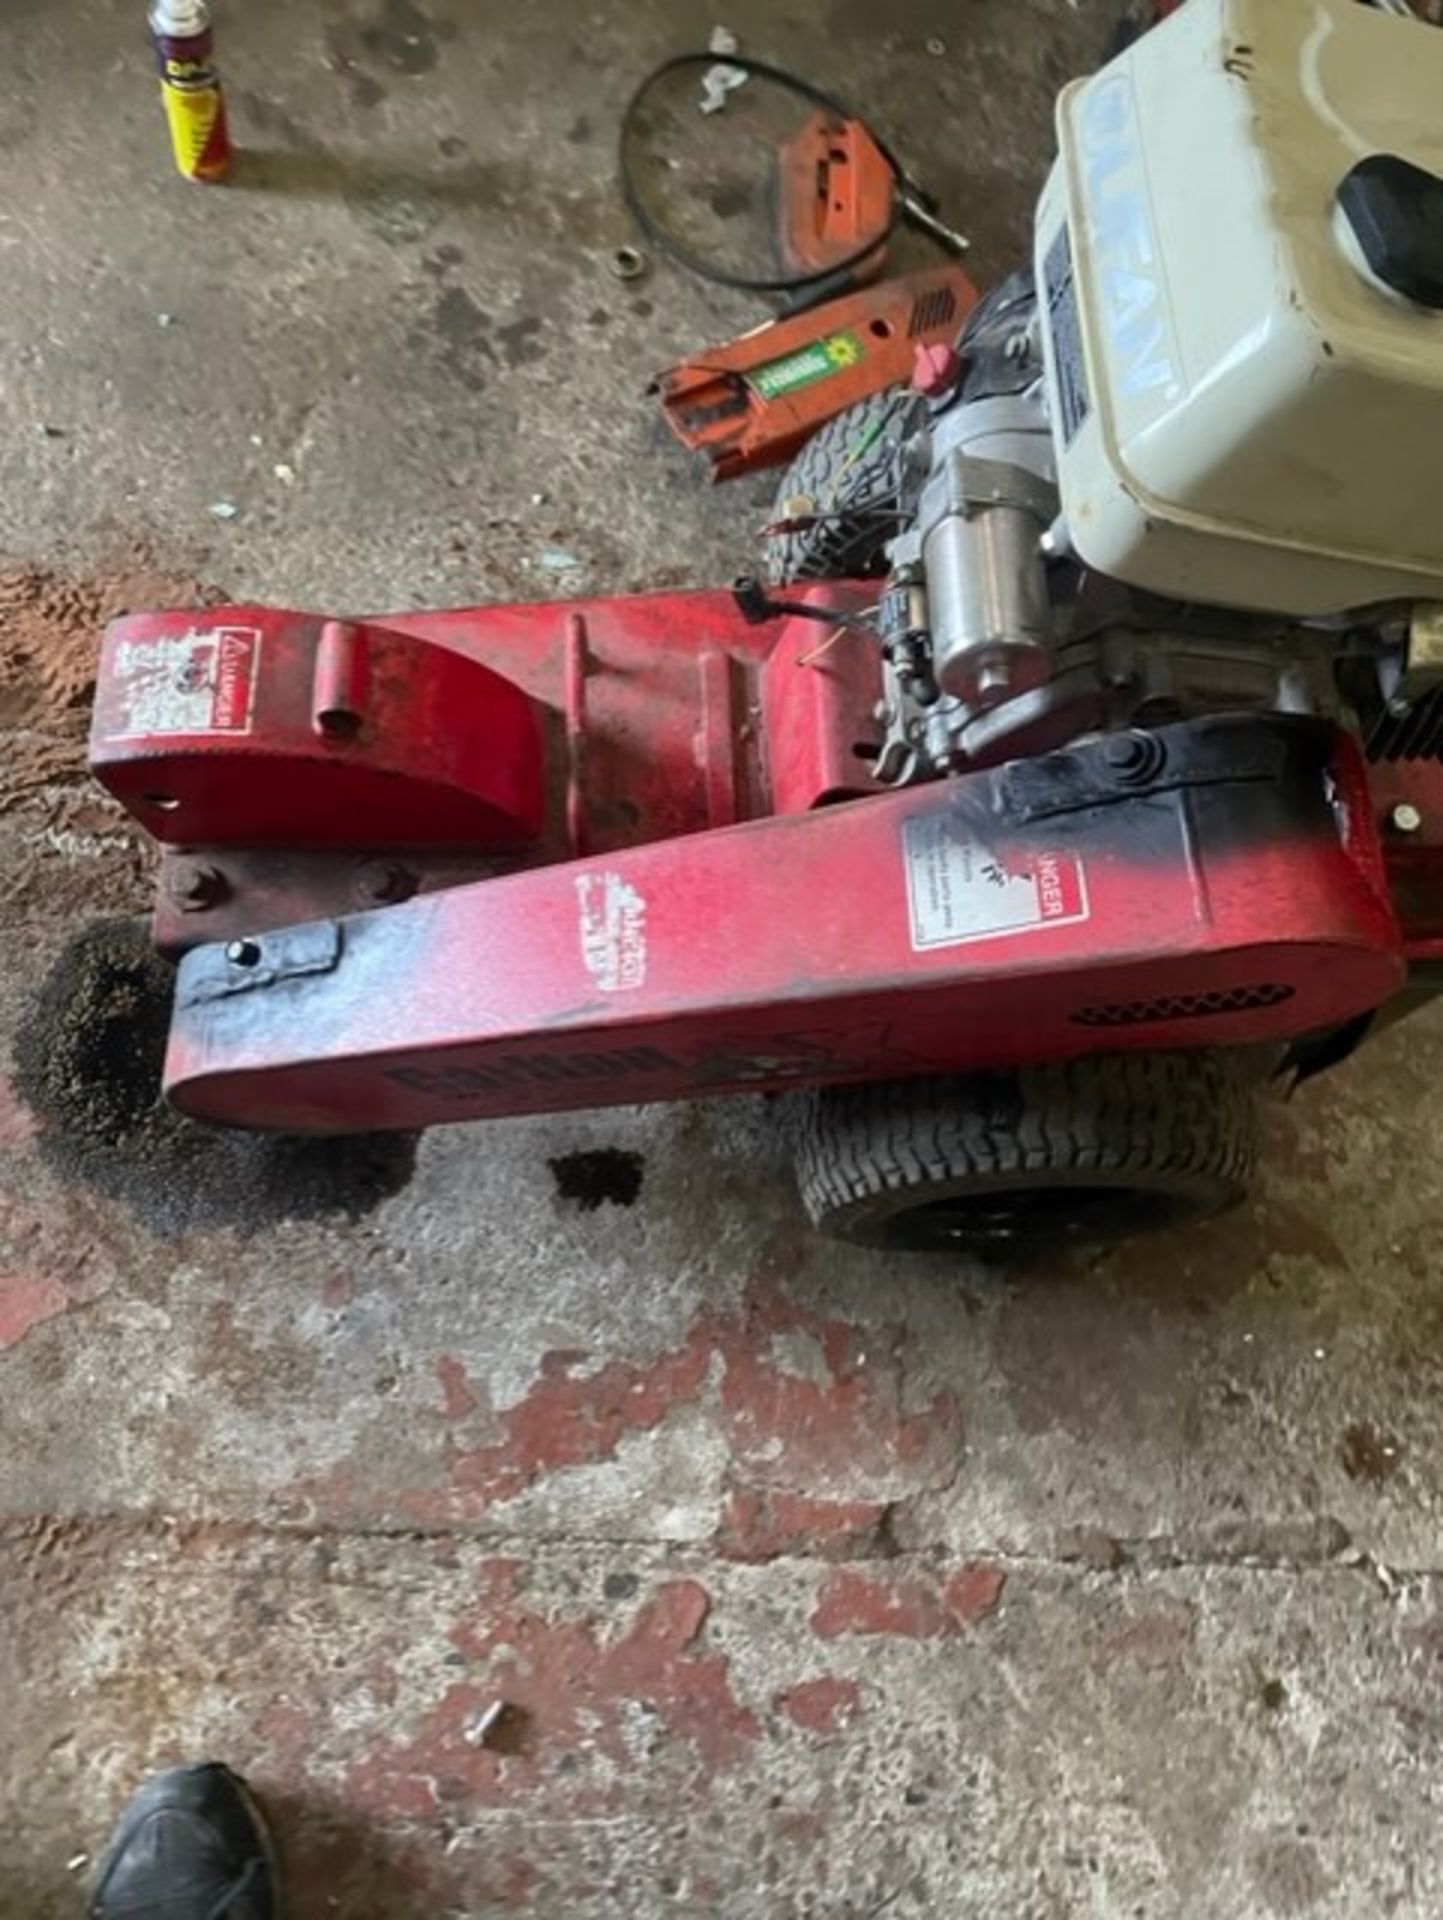 Carlton stump grinder that has an electric start lifan 390 engine in it the engine fires up and only - Image 4 of 7